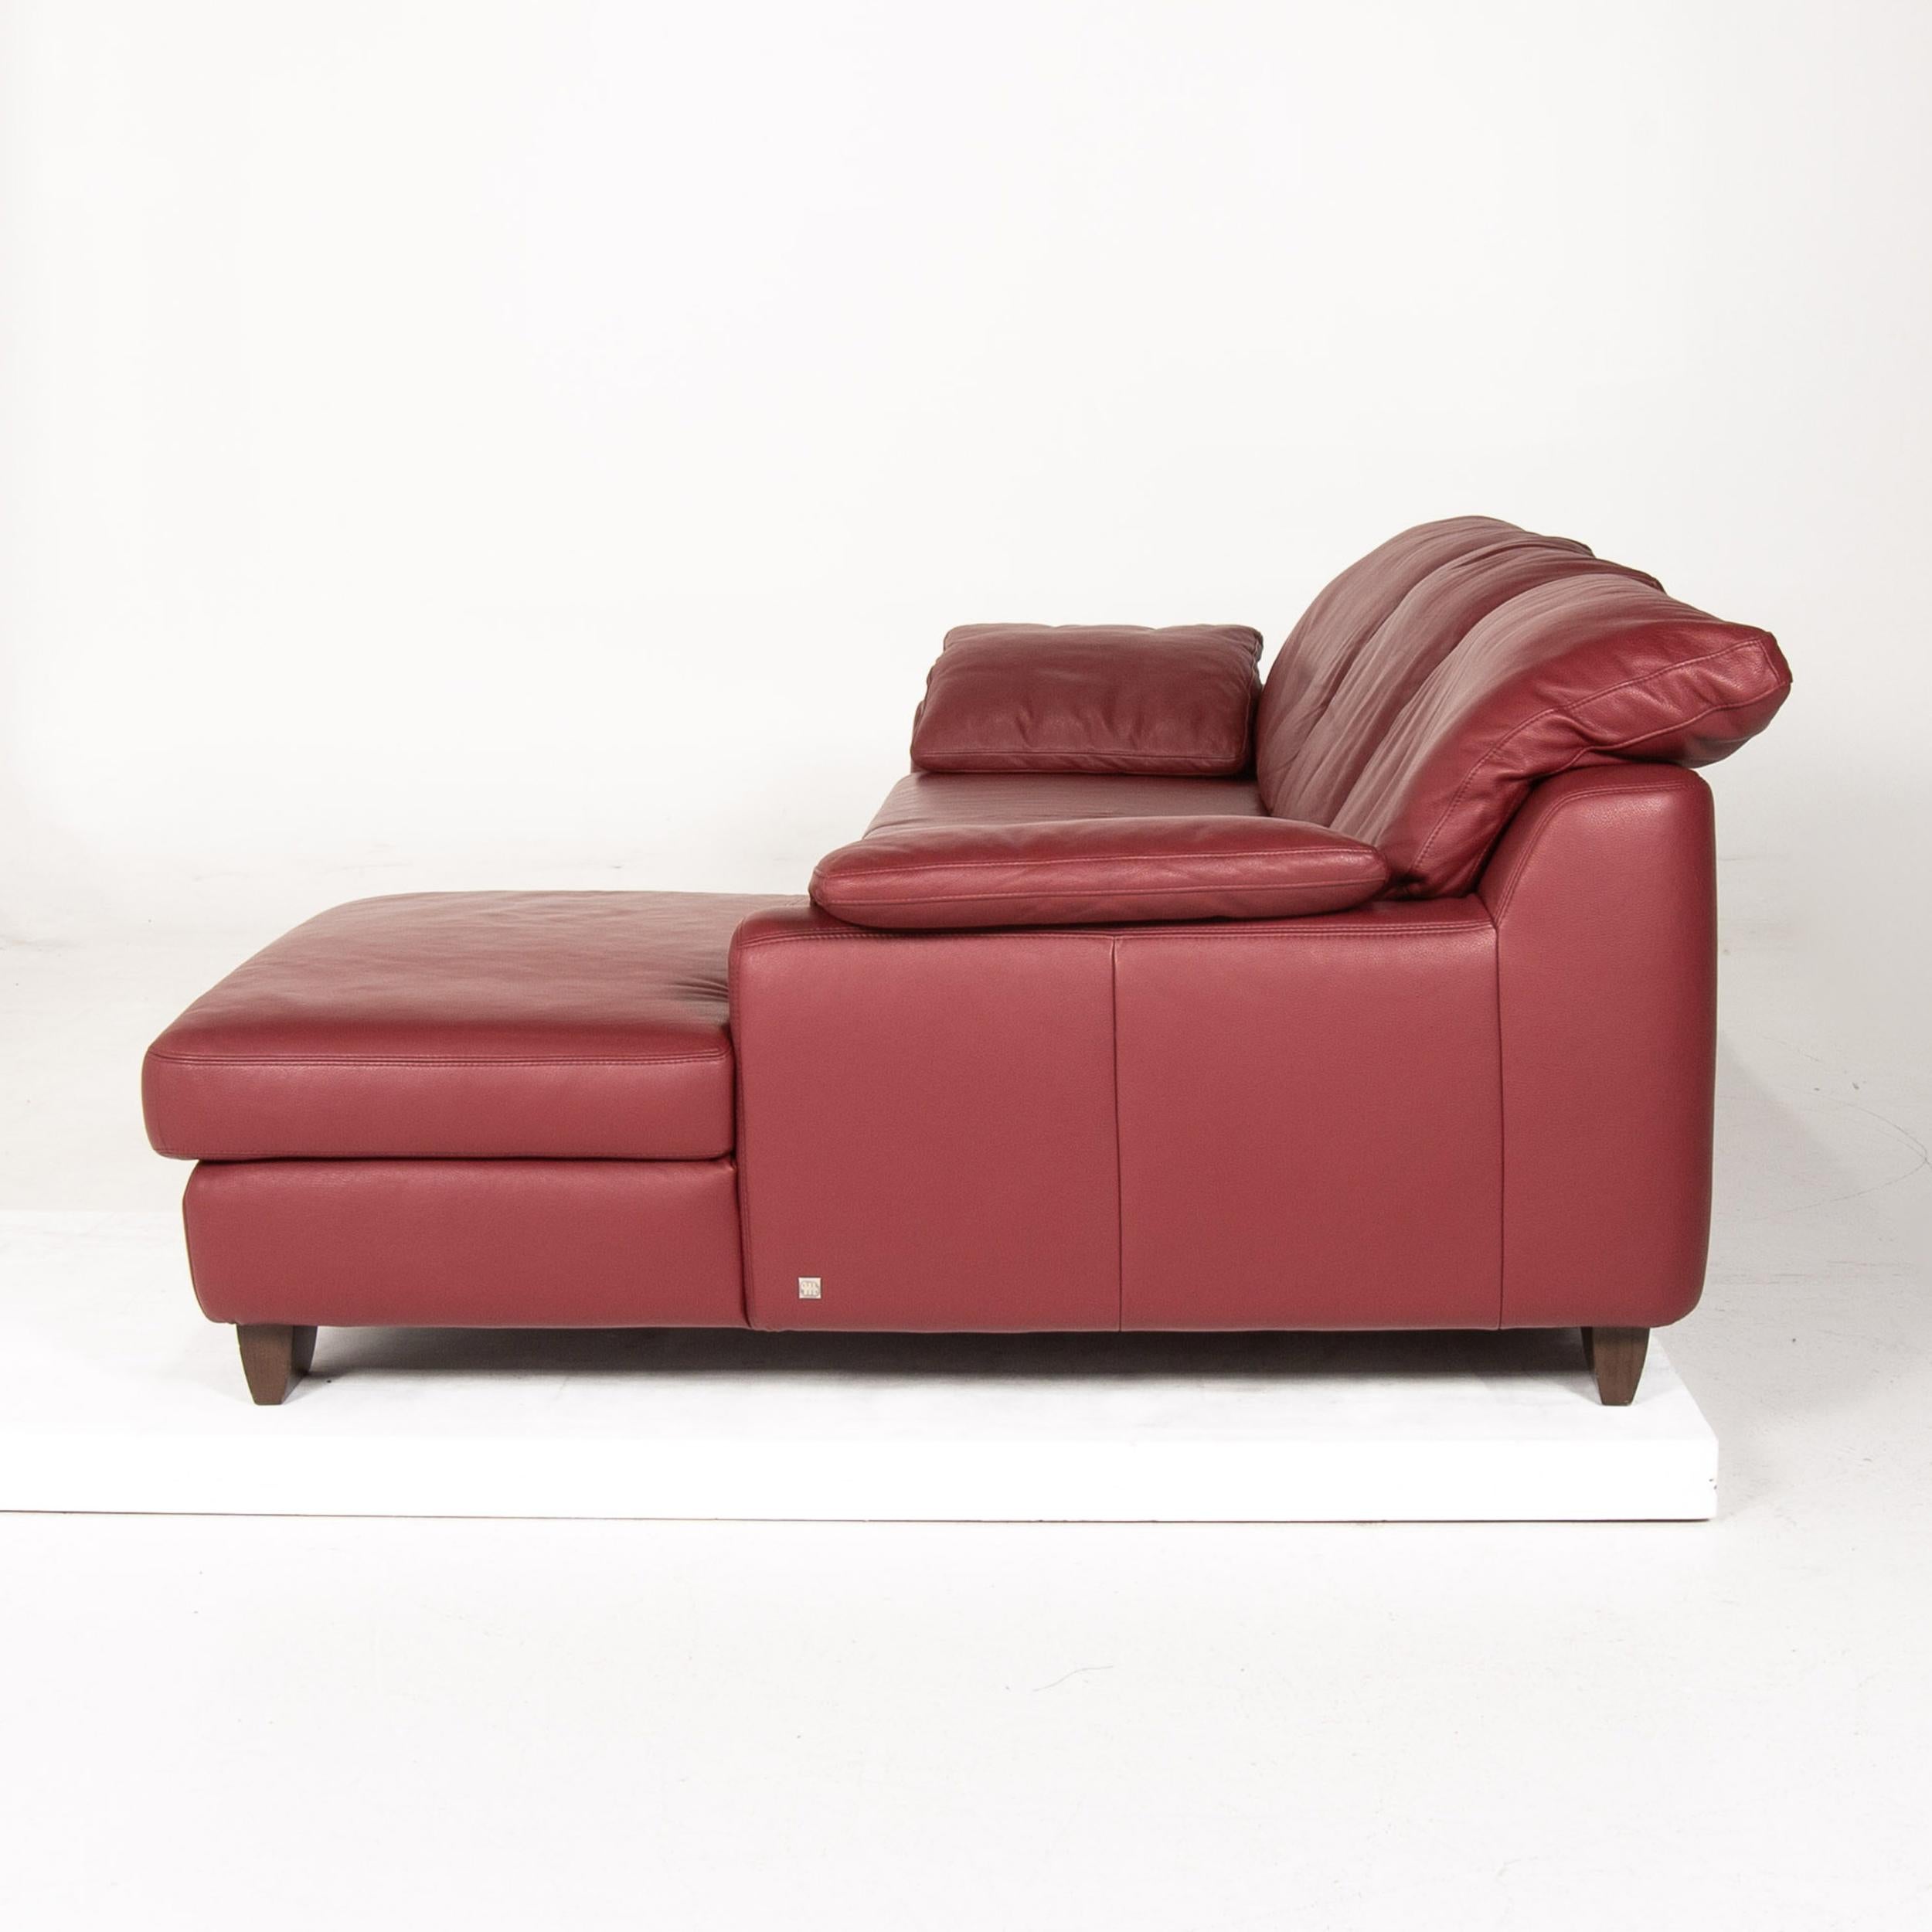 Musterring Leather Corner Sofa Red Dark Red Sofa Couch For Sale 4